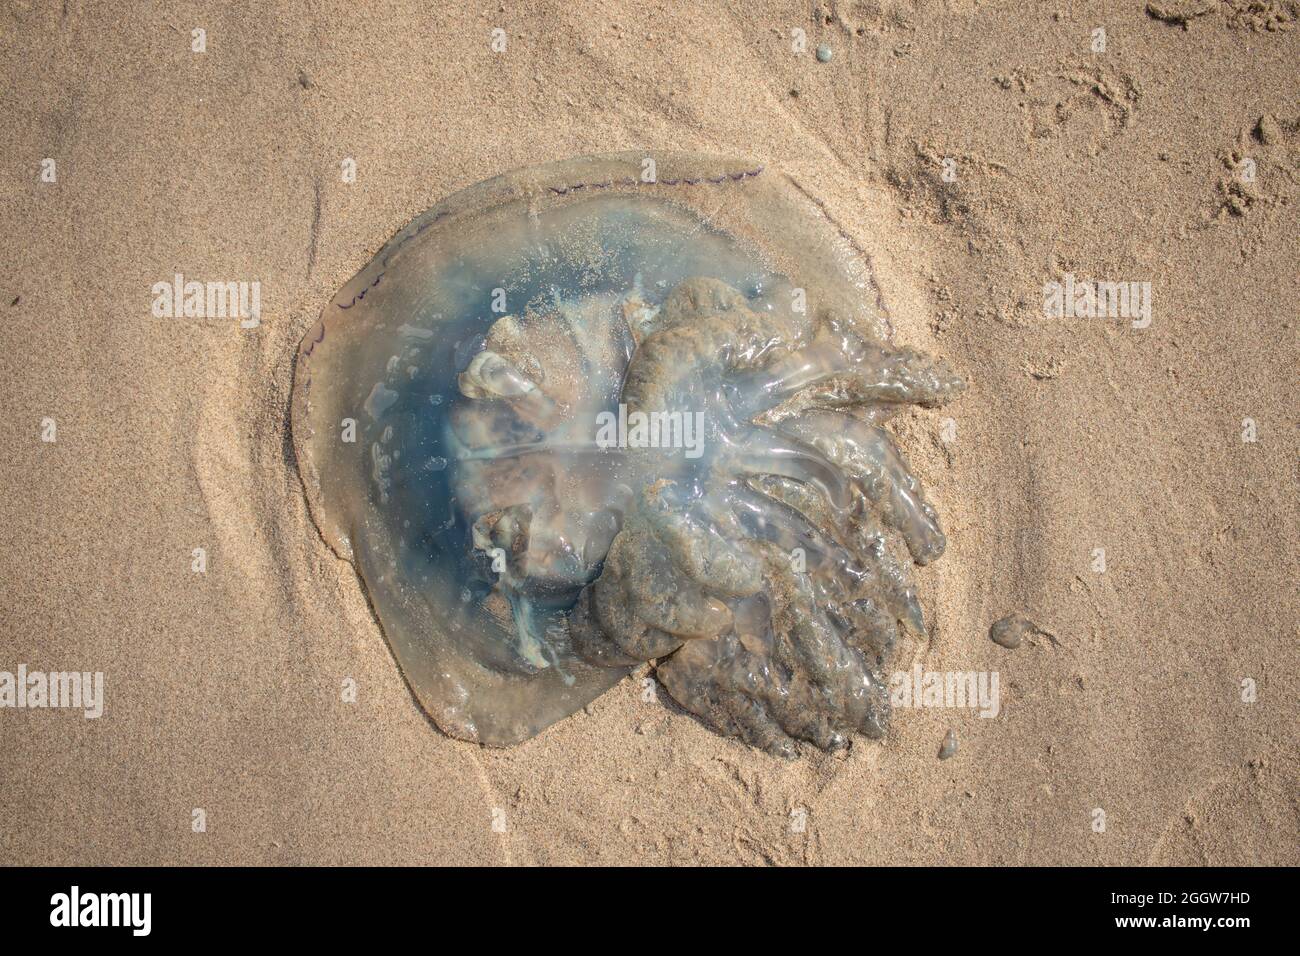 A big washed up jellyfish at the Dutch coast (Kijkduin, The Hague, The Netherlands) Stock Photo